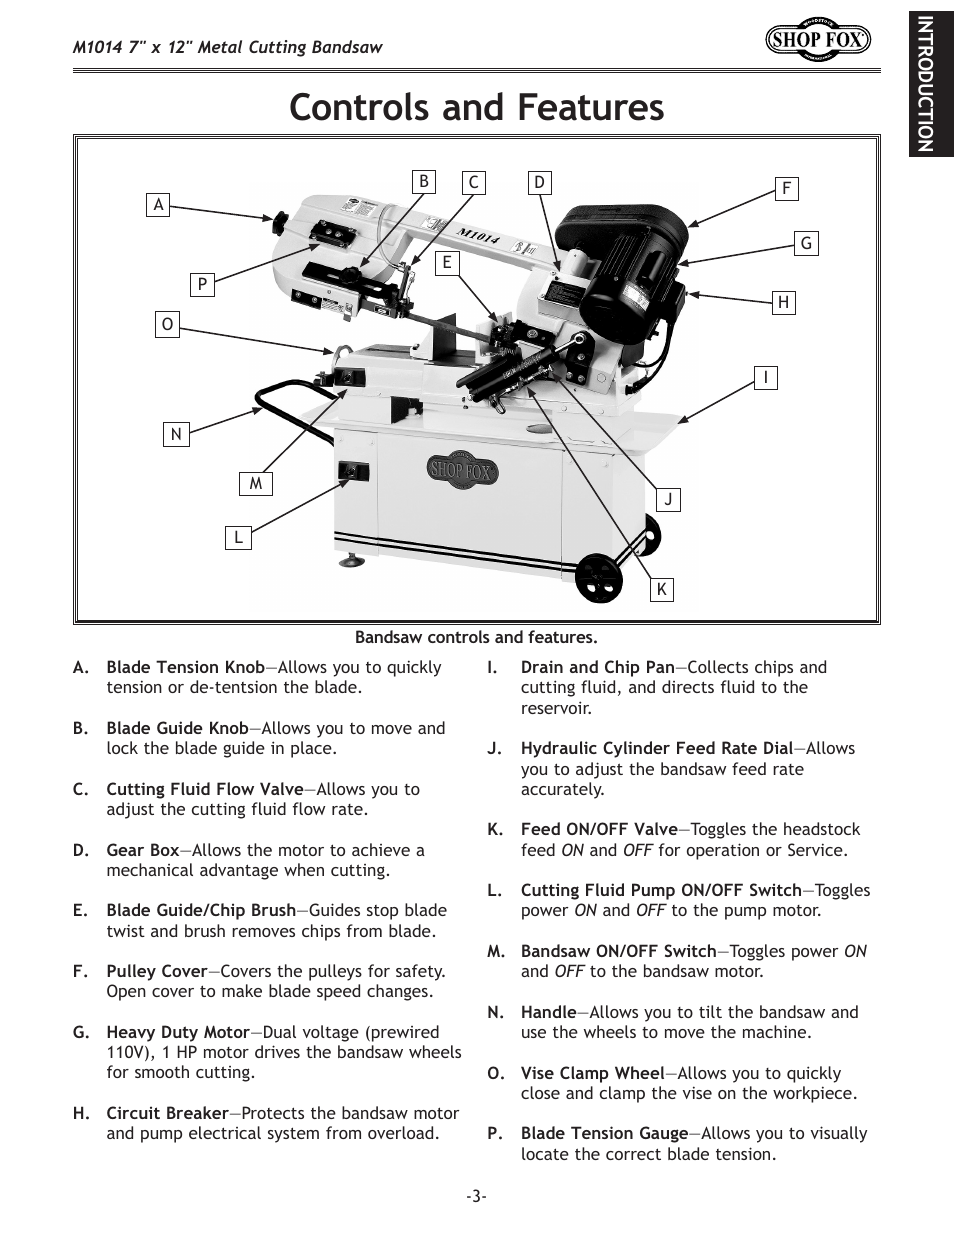 Controls and features | Woodstock SHOP FOX M1014 User Manual | Page 5 / 52